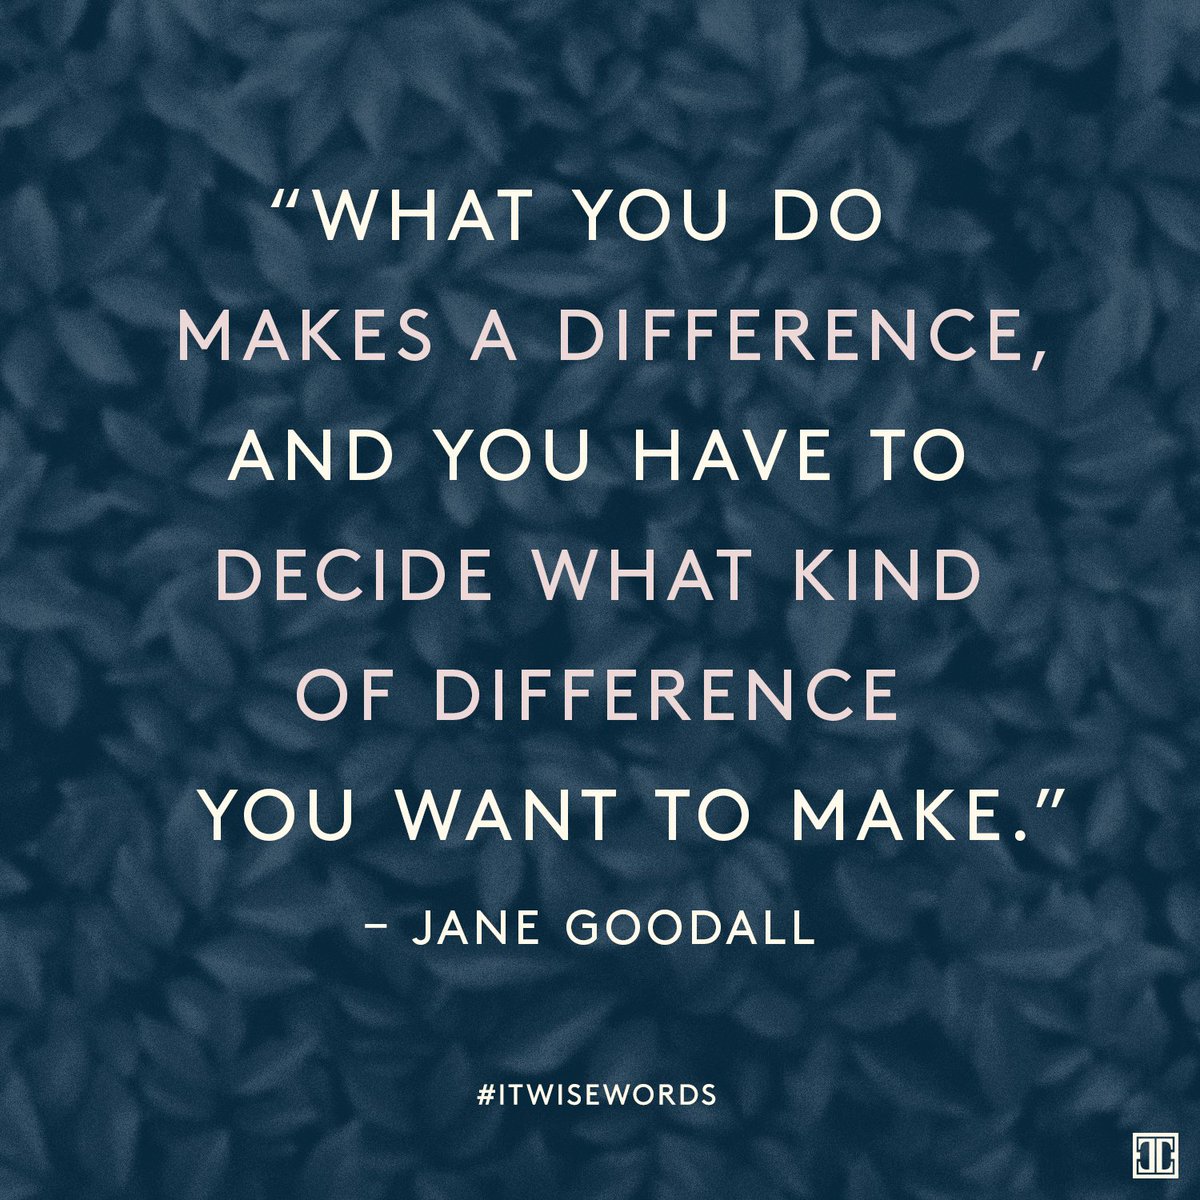 Use your power. #ITwisewords #wisewords #quote #inspiration #JaneGoodall https://t.co/I2pdVwOAyO https://t.co/2GtrDK7y01